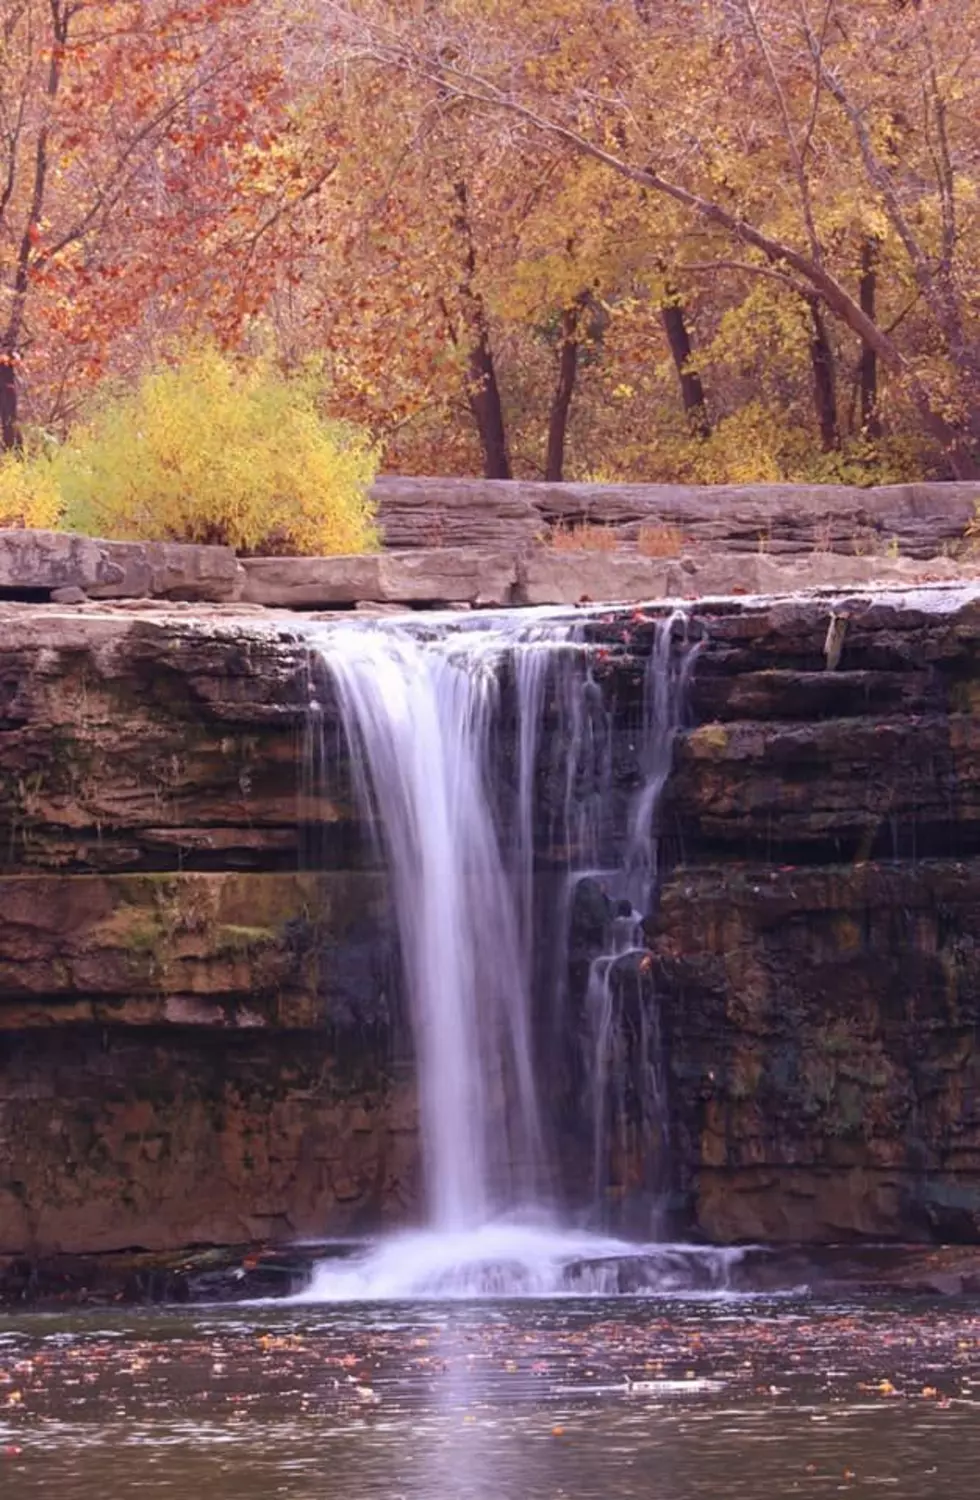 Indiana Waterfalls With Stunning Fall Foliage Backdrop are a Must See On Your Next Autumn Getaway